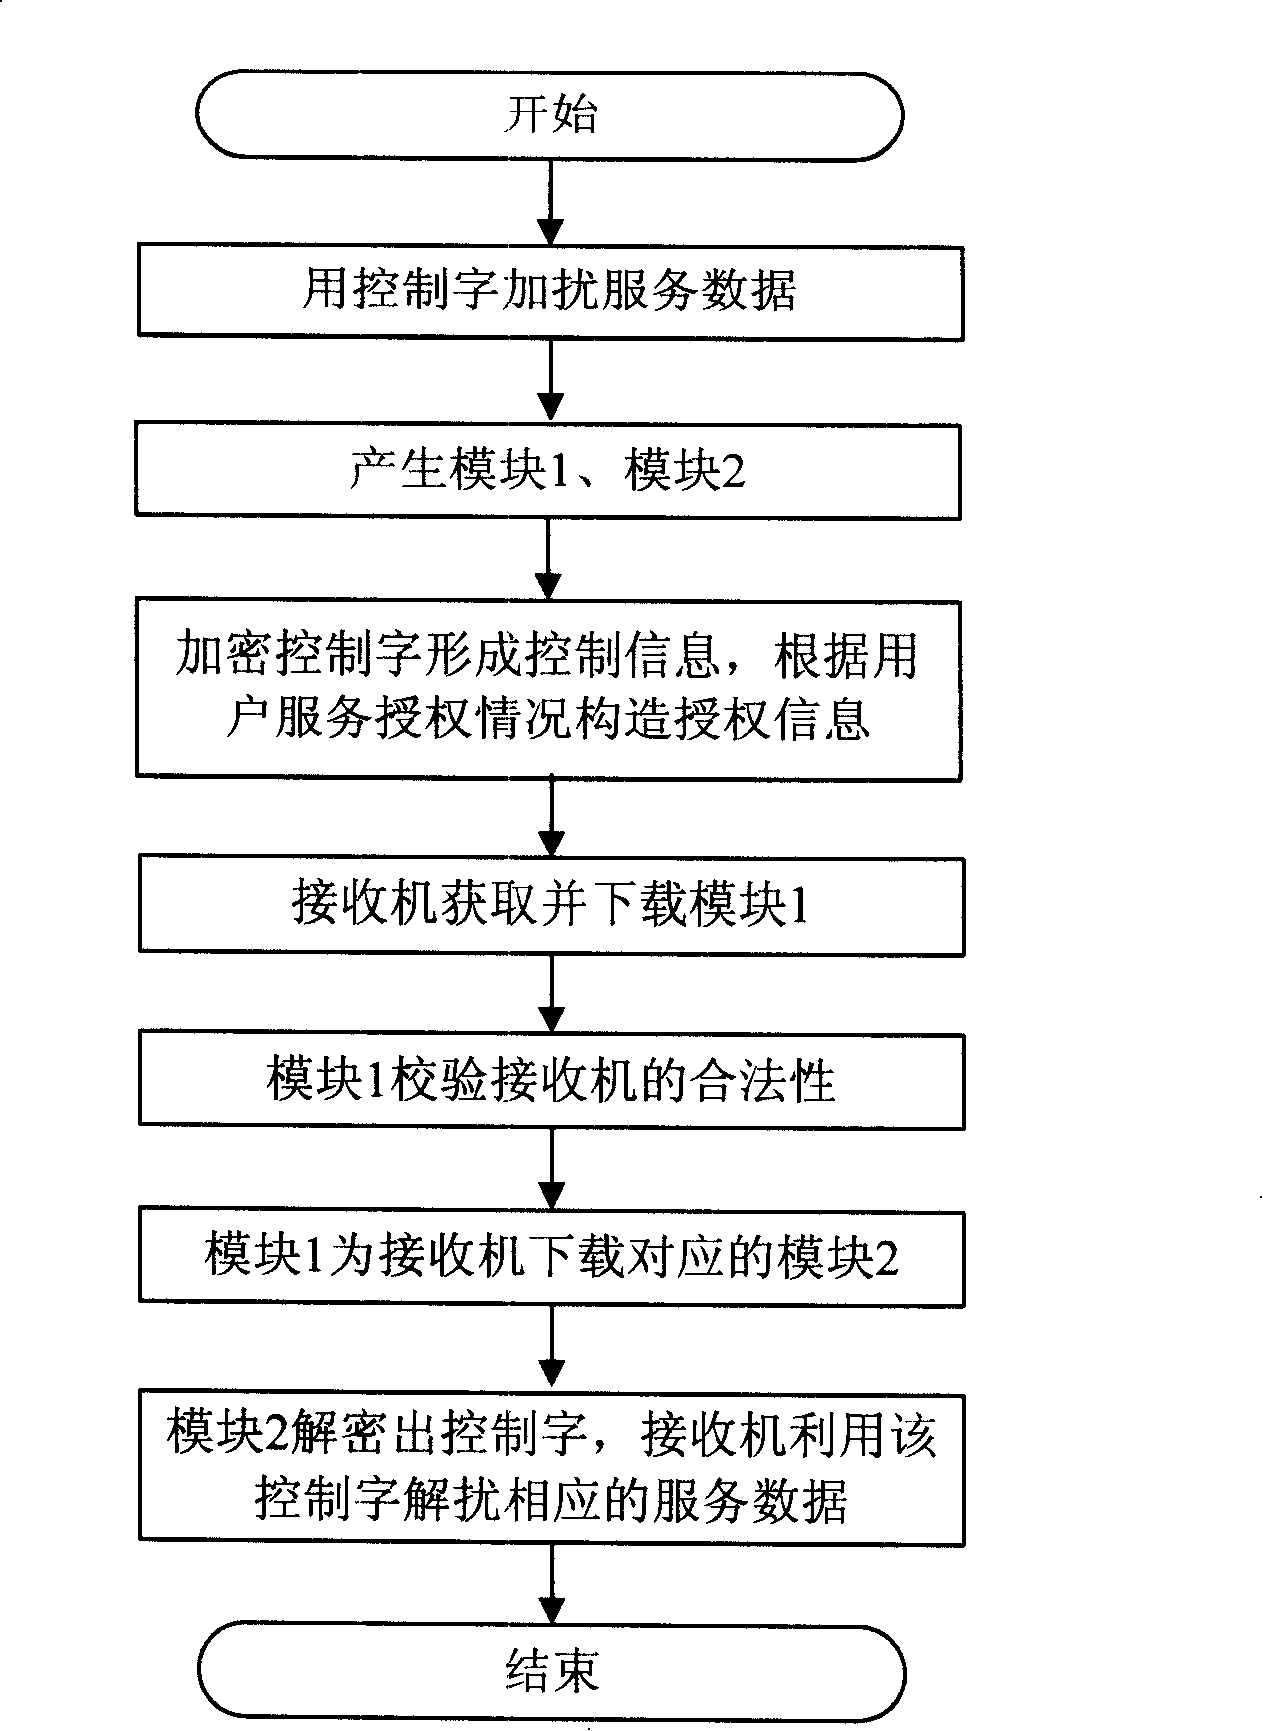 Method and system for implementing broadcasting network condition receiving